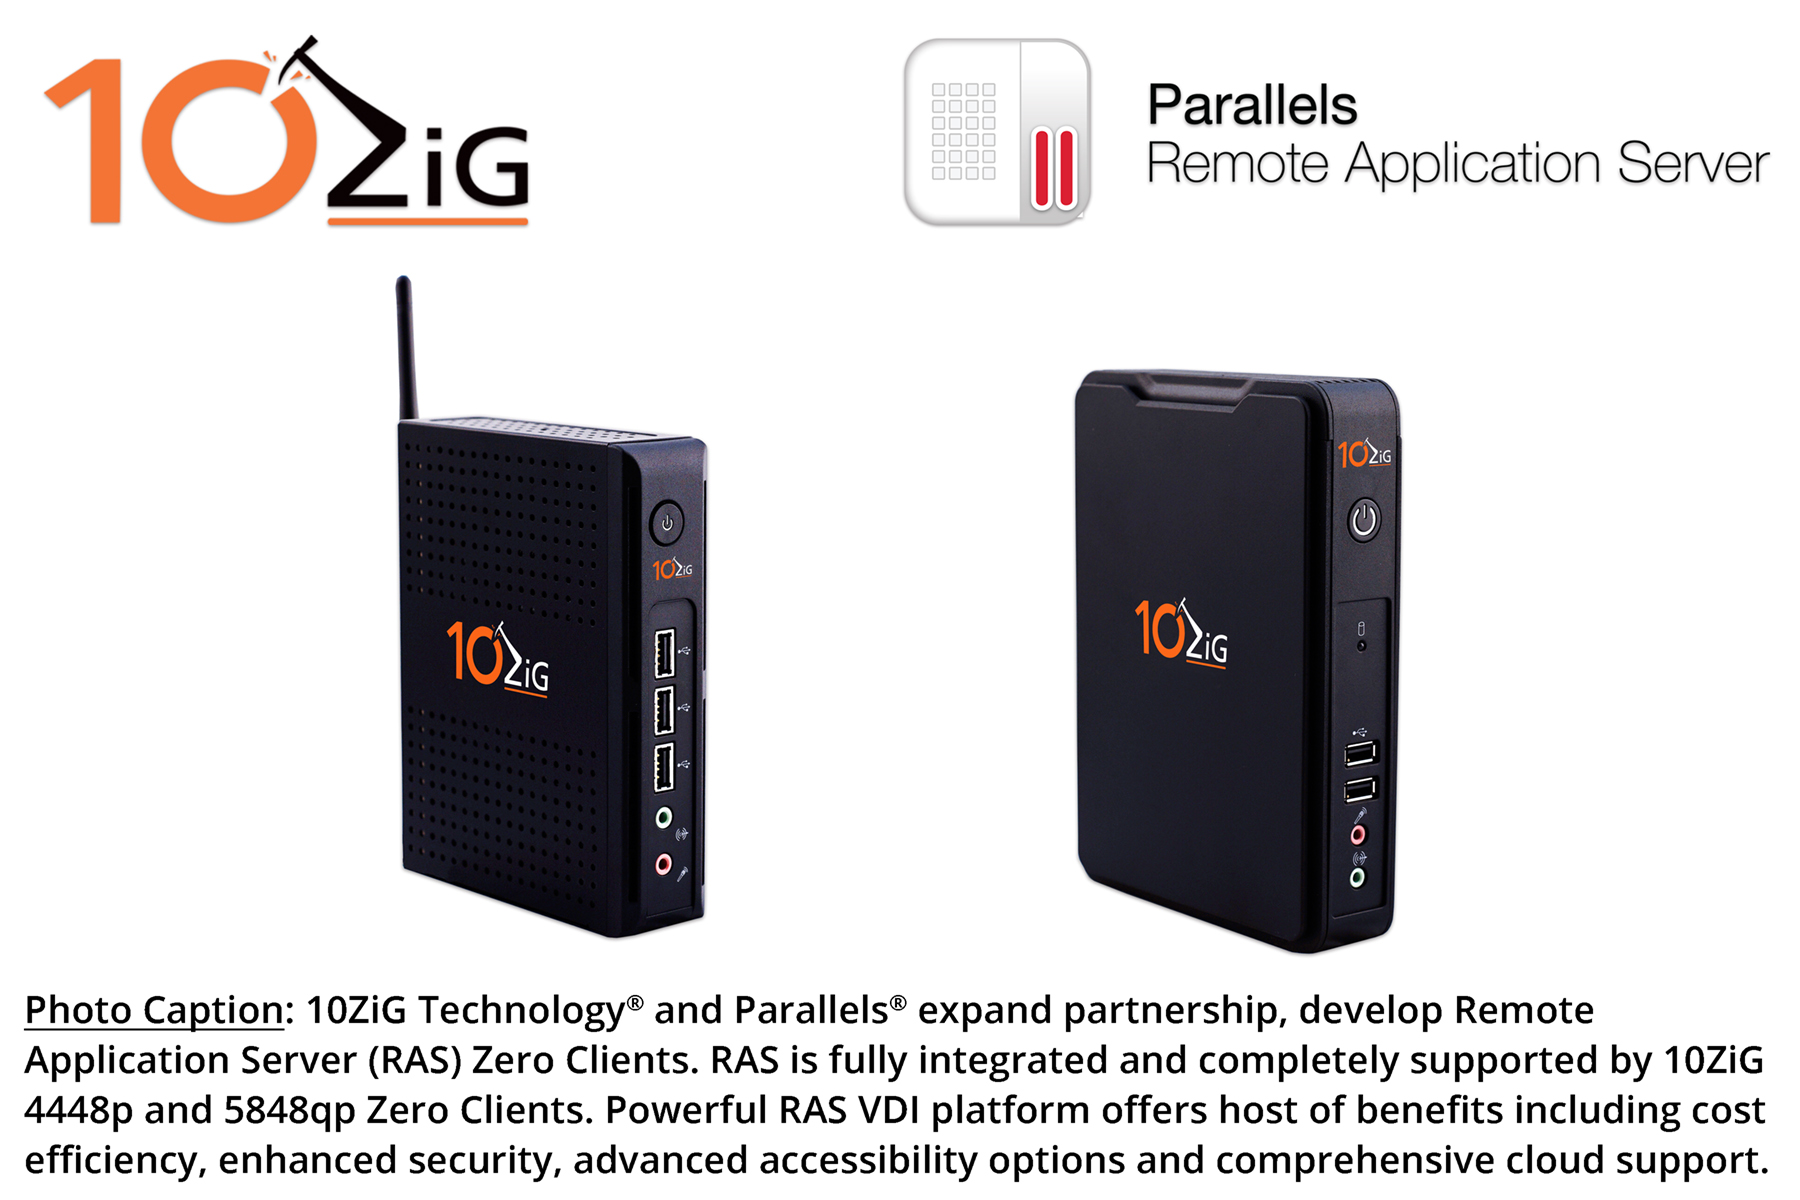 10ZiG Technology® and Parallels® expand partnership, develop Remote Application Server (RAS) Zero Clients. Powerful RAS VDI platform offers host of benefits including cost efficiency, cloud support.